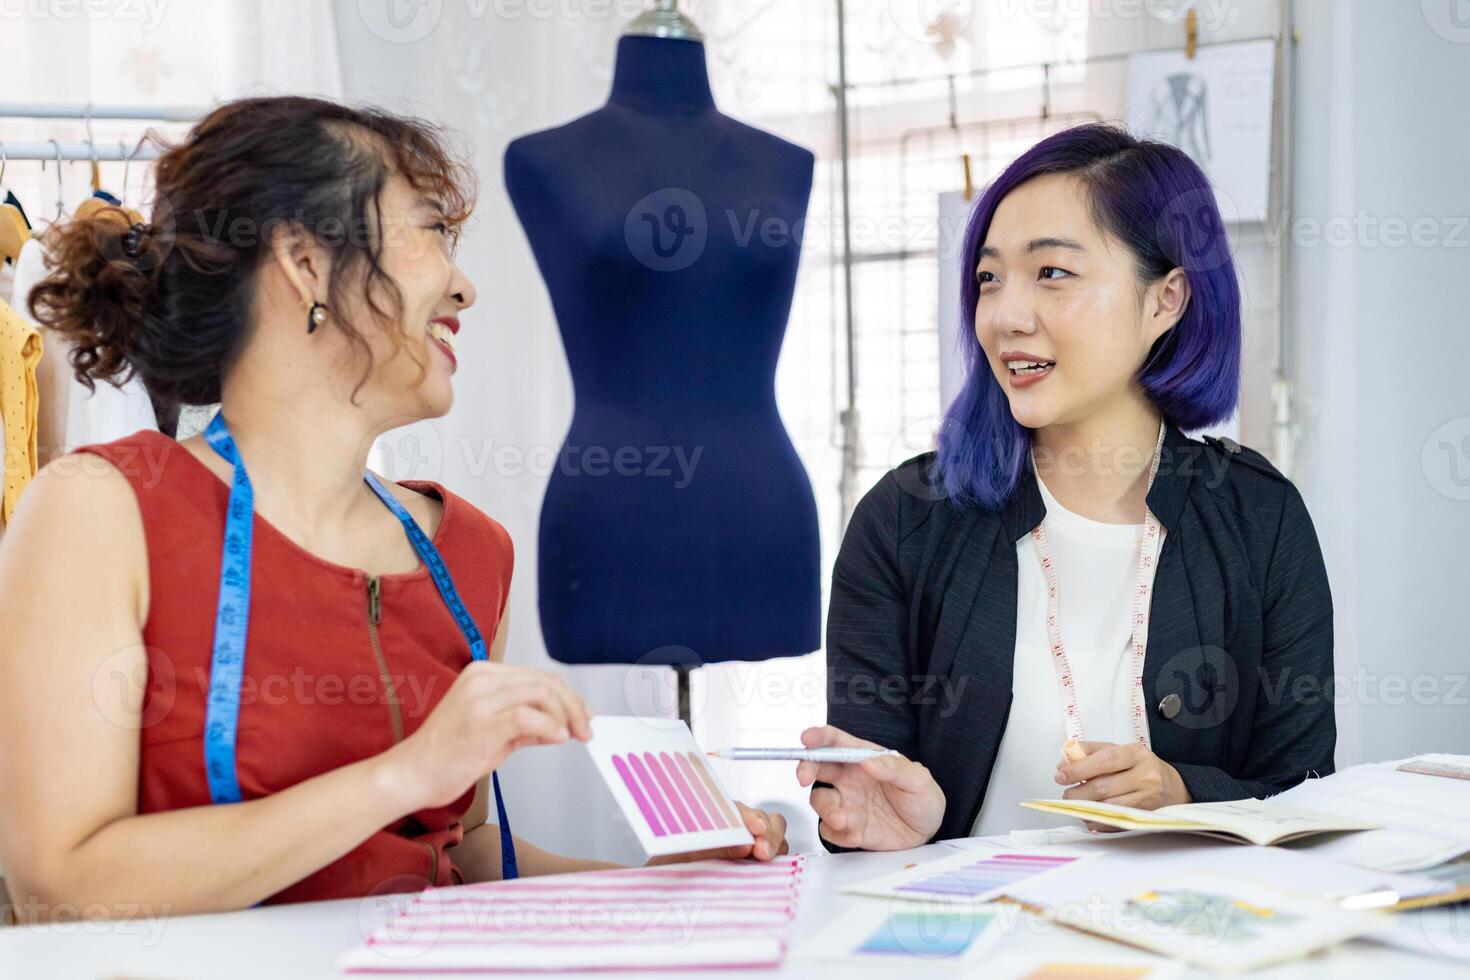 Team of fashionable freelance dressmakers choosing design and pantone for new custom made dress while working in artistic workshop studio for fashion design and clothing business industry photo